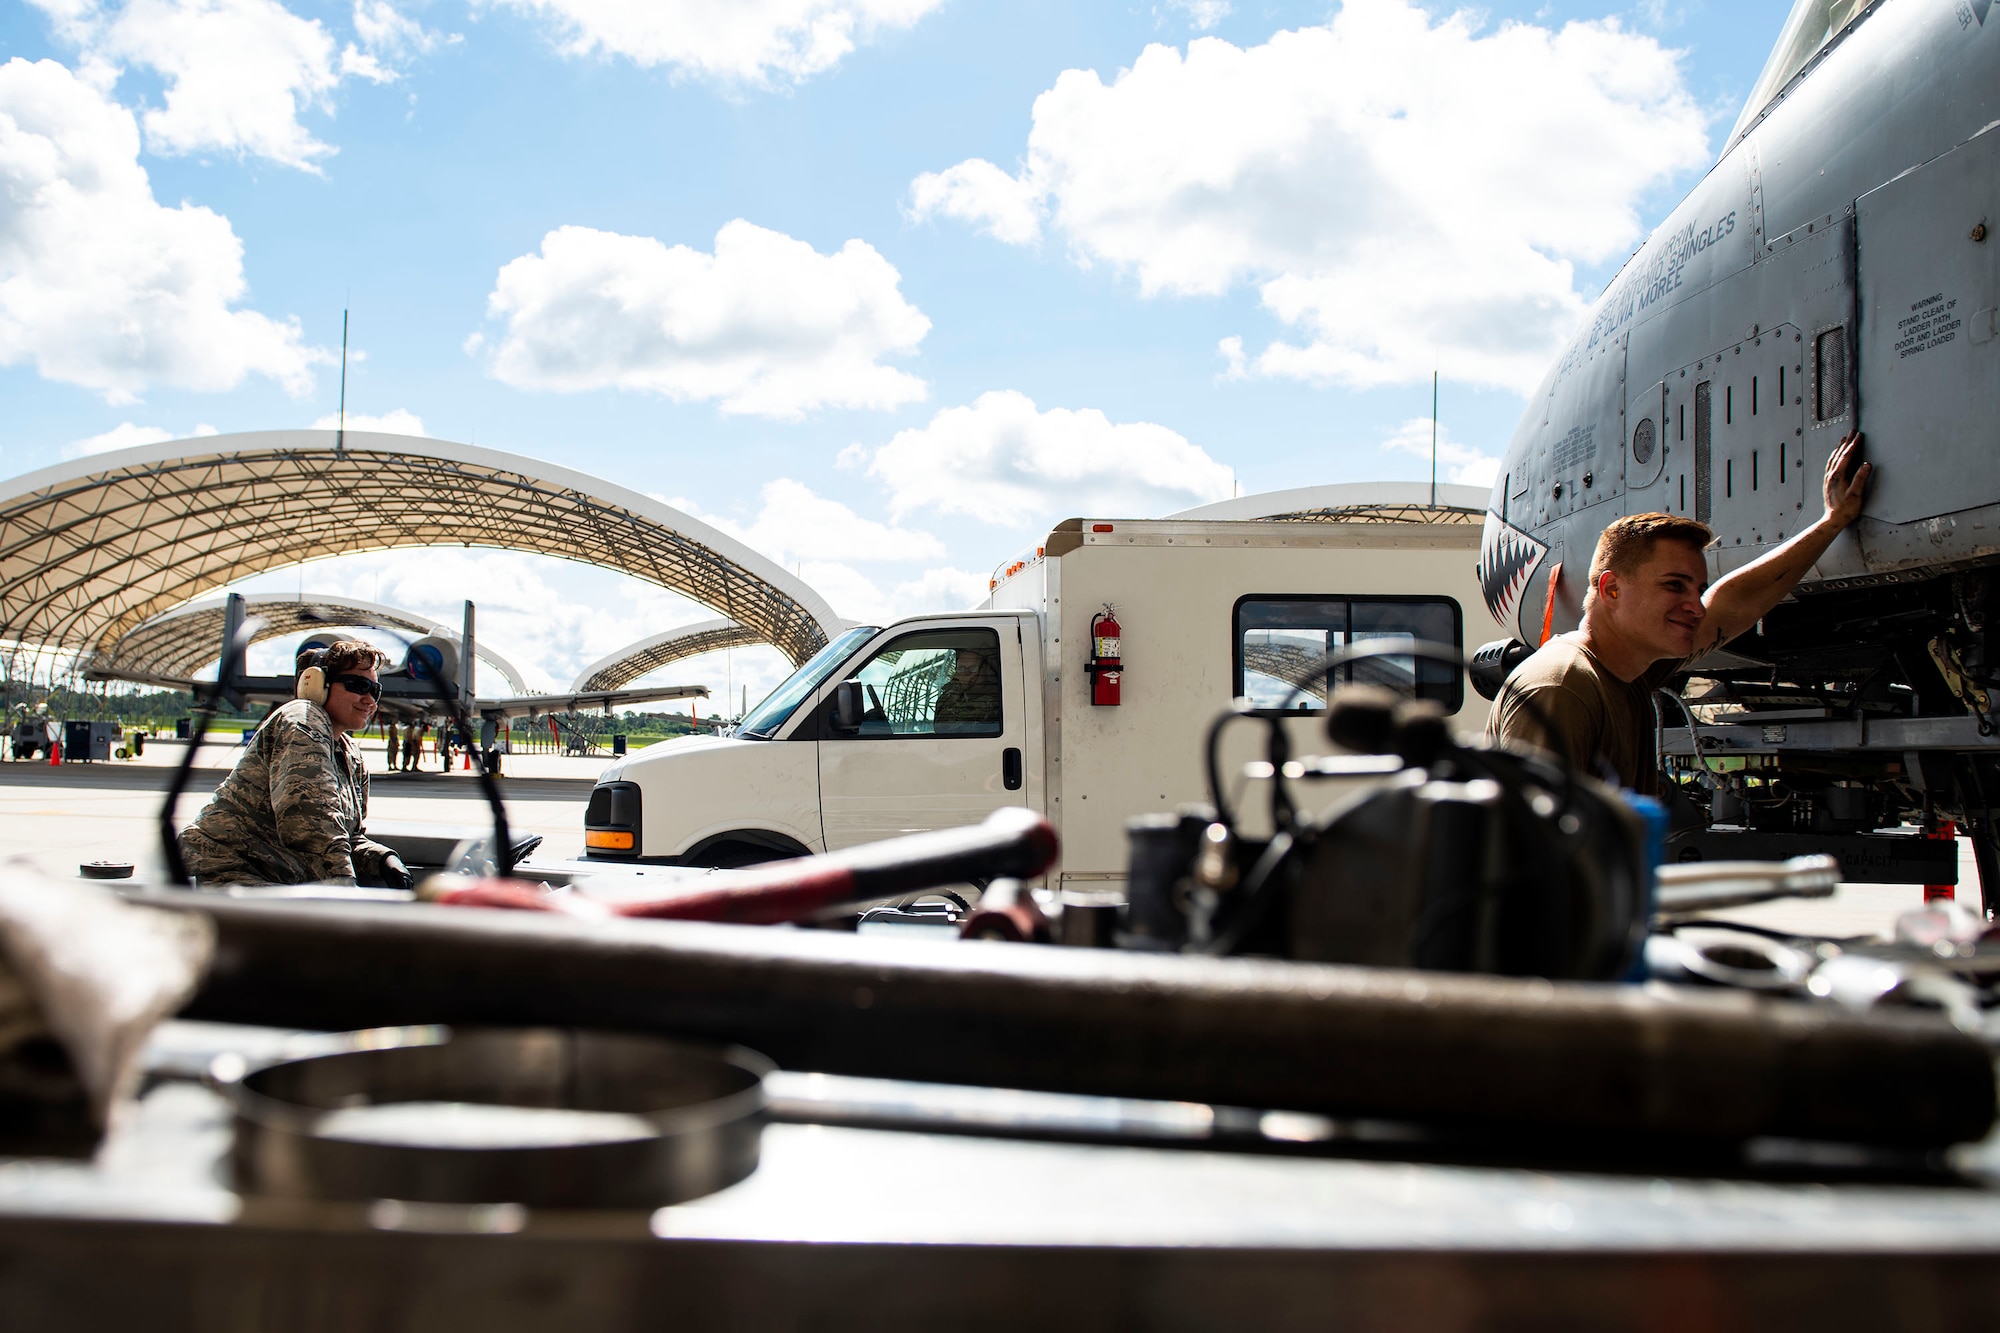 Airmen from the 74th Aircraft Maintenance Unit prepare to lower a 30mm GAU-8 Gatling Gun system during unscheduled maintenance, July 23, 2019, at Moody Air Force Base, Ga. Unscheduled maintenance occurs when discrepancies are discovered with A-10C Thunderbolt II weapon systems. These repairs aid in reducing down time of the aircraft and supporting sustained operations tempo. (U.S. Air Force photo by Senior Airman Erick Requadt)